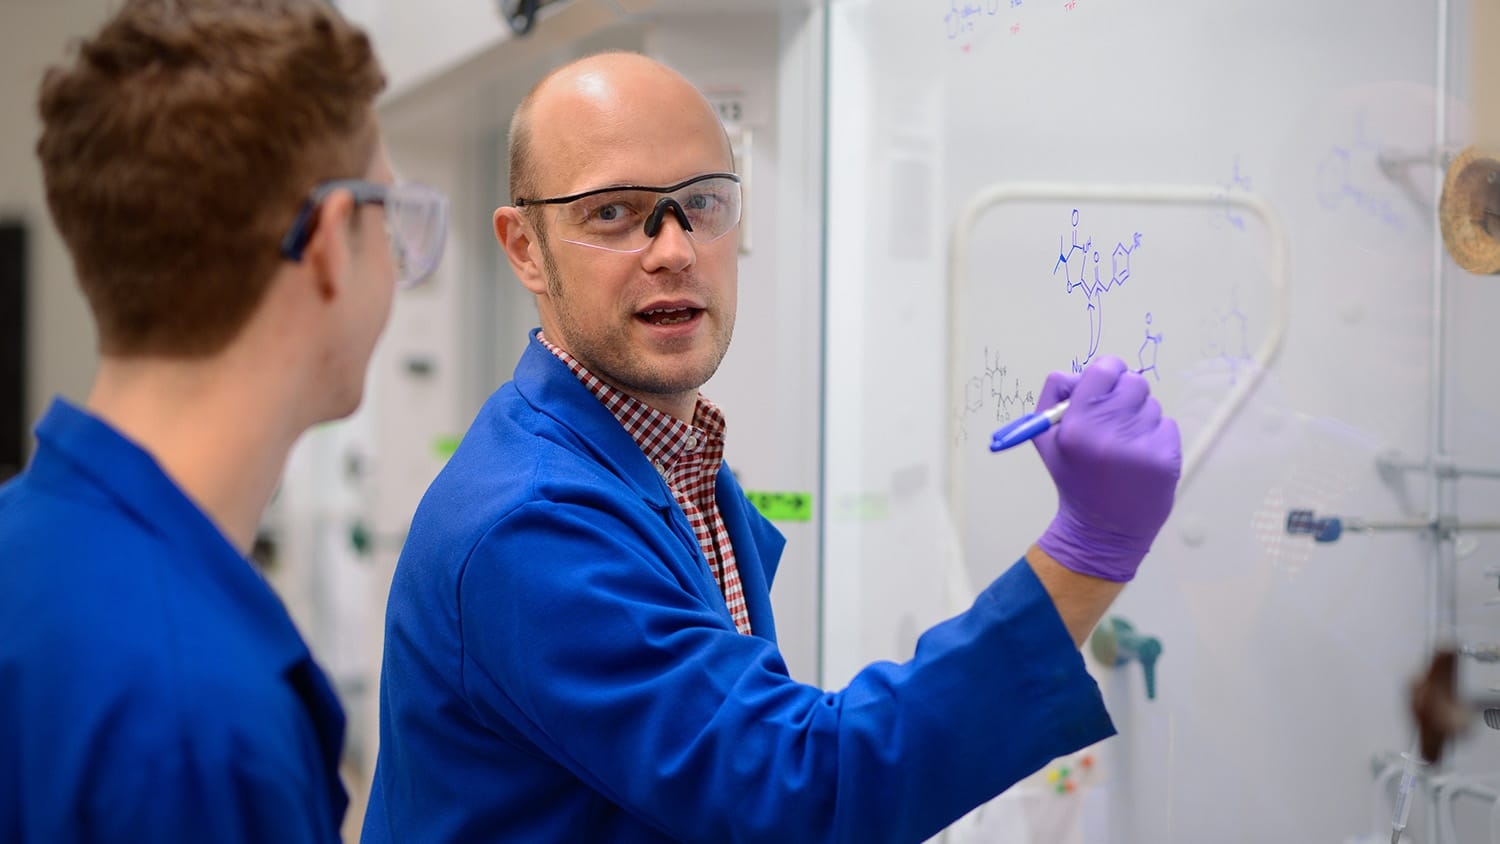 Chemistry professor Joshua Pierce writes on a whiteboard while talking to a student